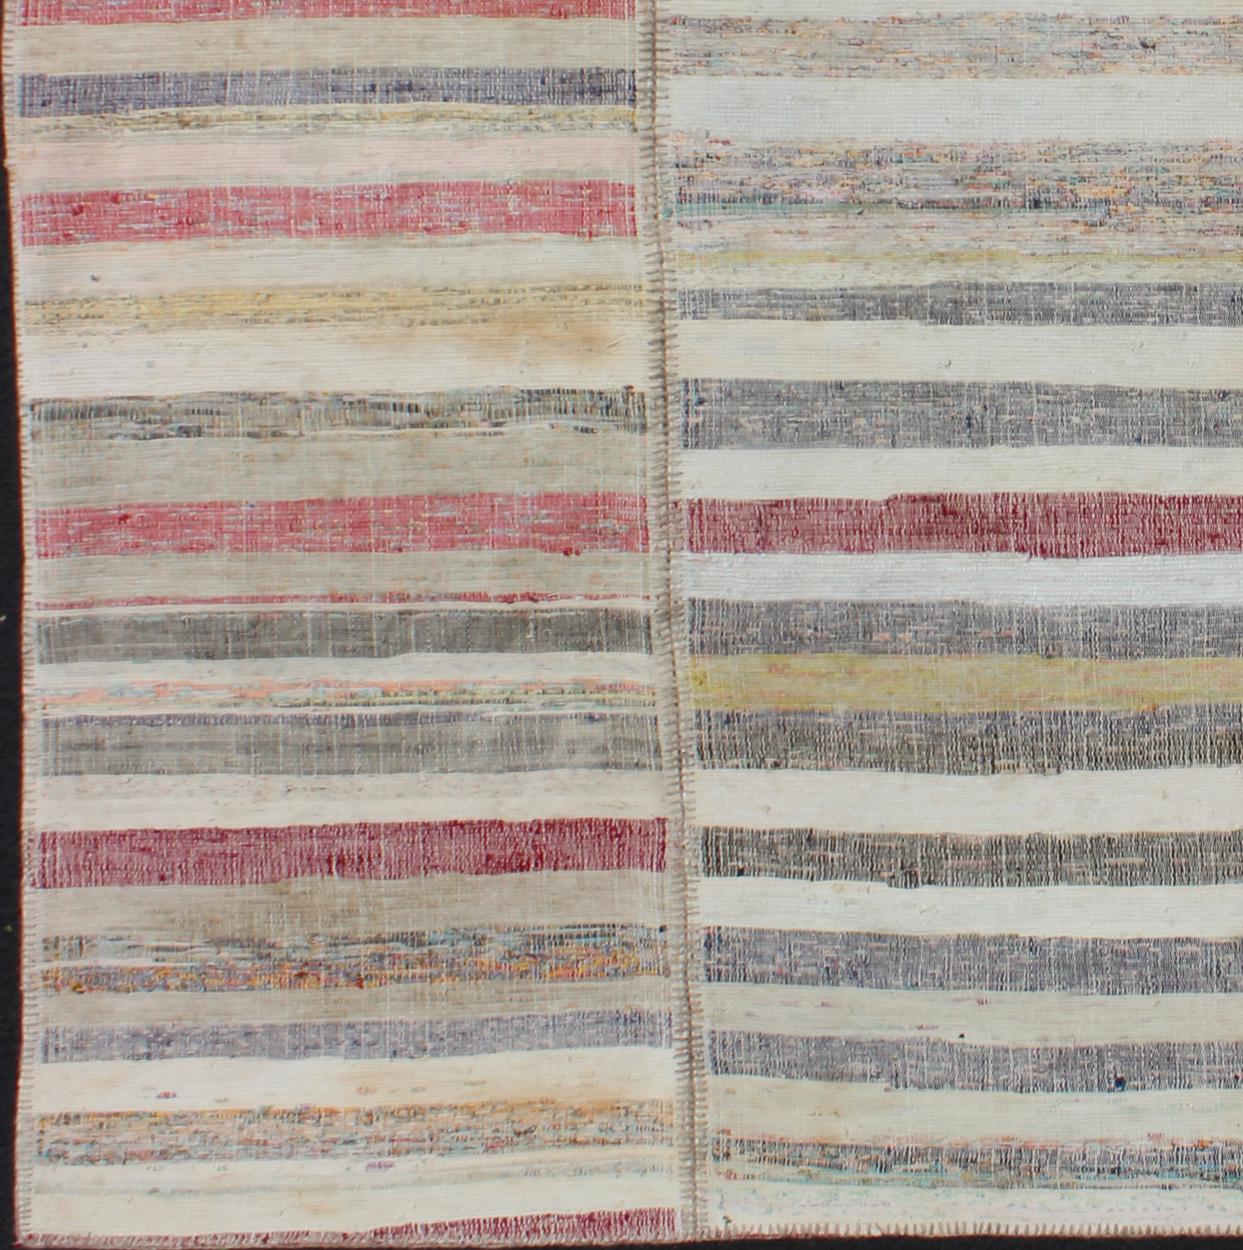 Multi-panel vintage Turkish Kilim rug with stripe design in gray, taupe, pink, red, turquoise, rug emd-11627, country of origin / type: Turkey / Kilim, circa mid-20th century.

This multi-paneled, square sized, striped Kilim is an example of